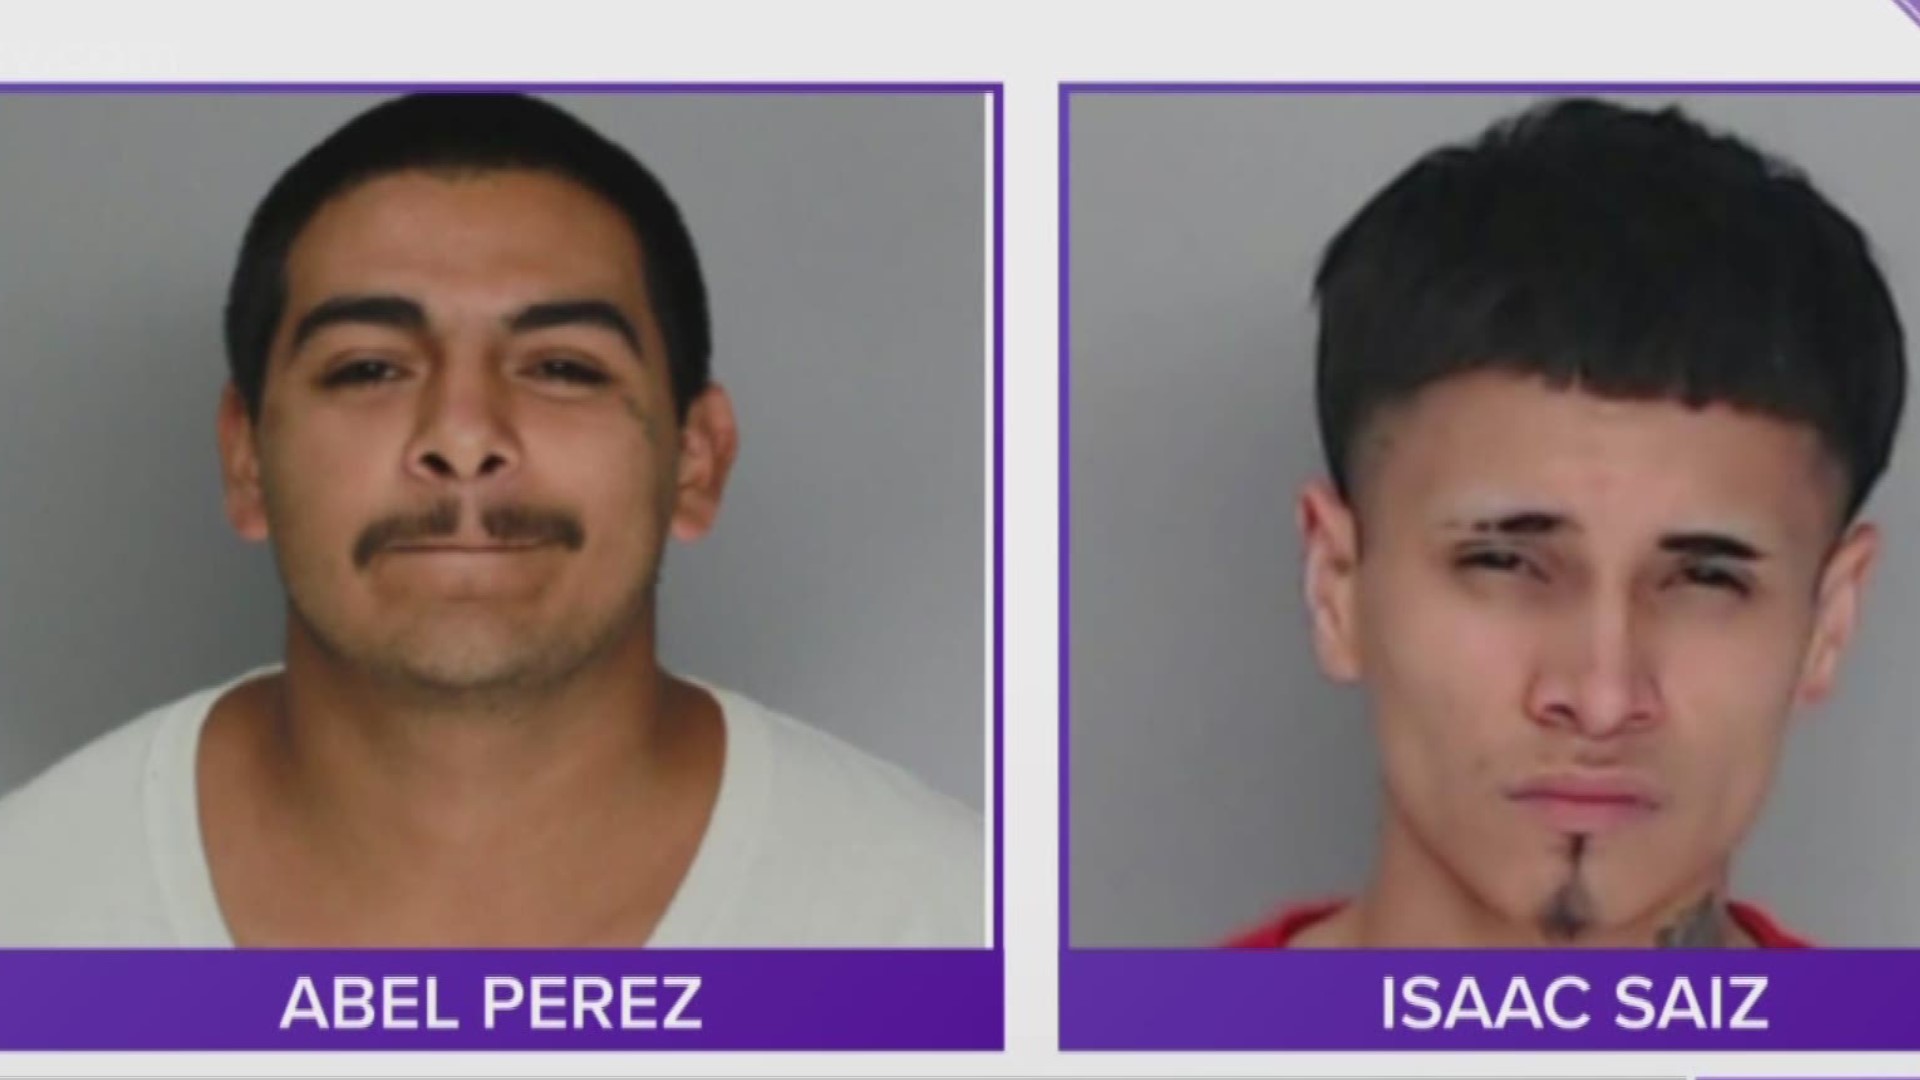 Both Saiz and Perez face charges of aggravated assault and remain in jail each on a $50,000 bond.